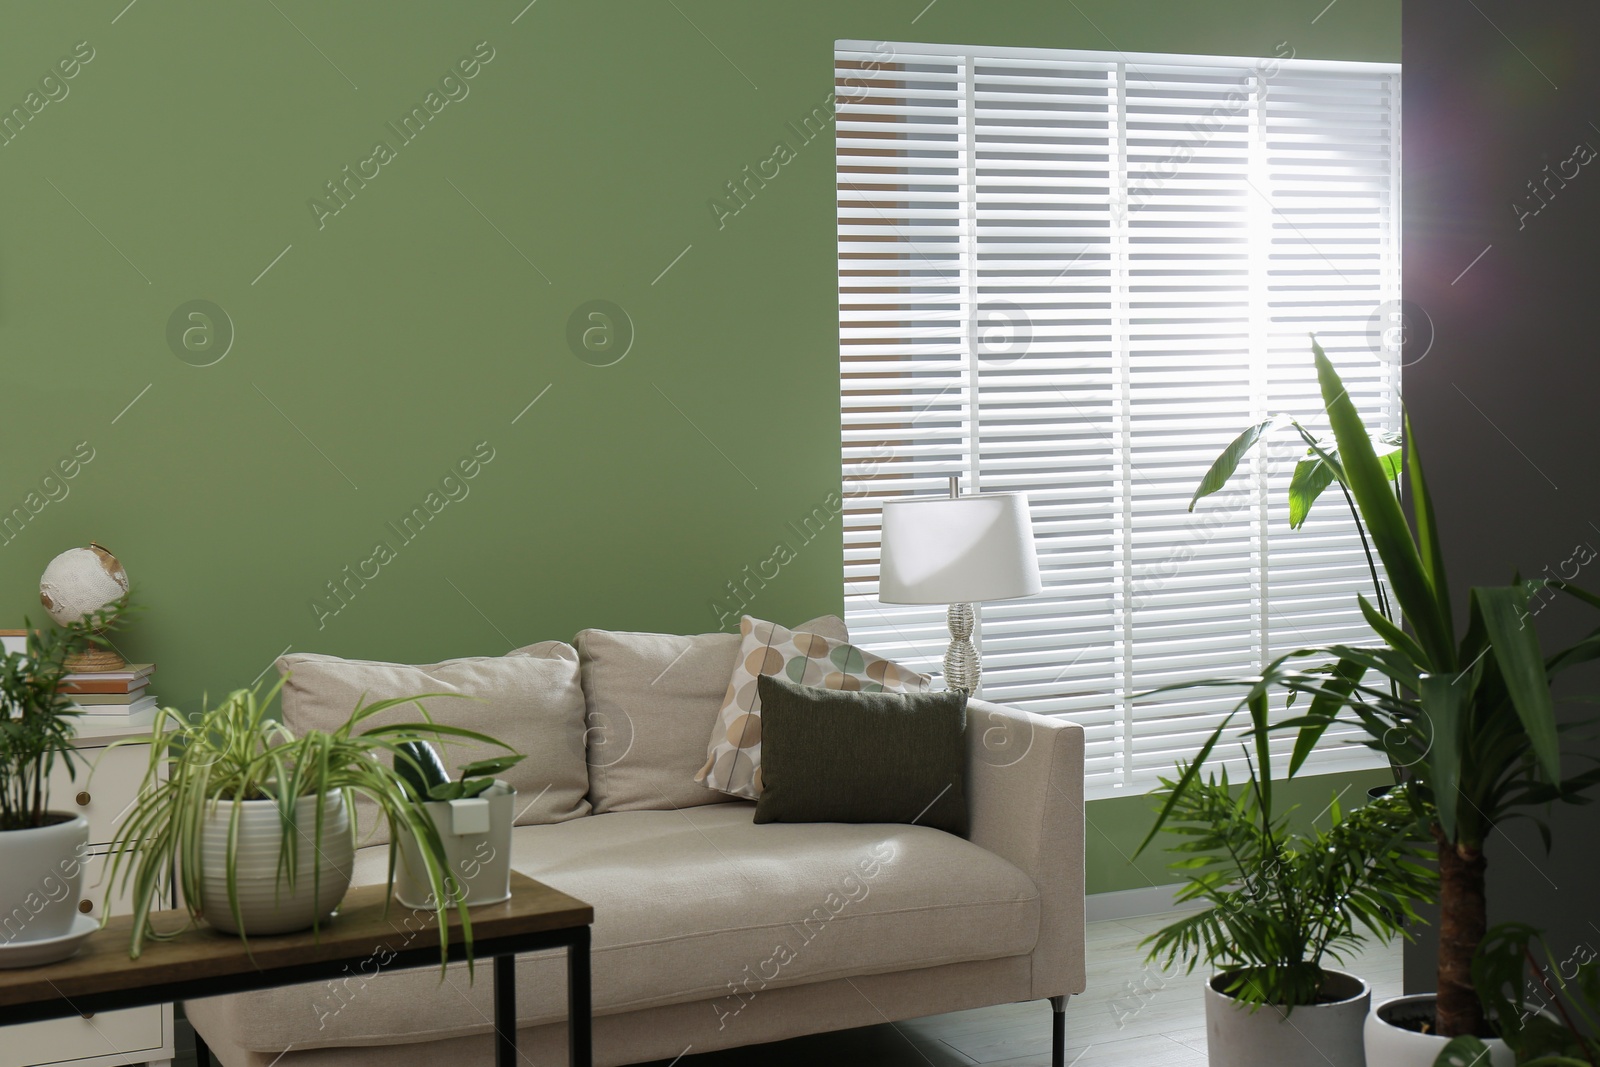 Photo of Comfortable sofa, houseplants and chest of drawers in cozy room. Interior design